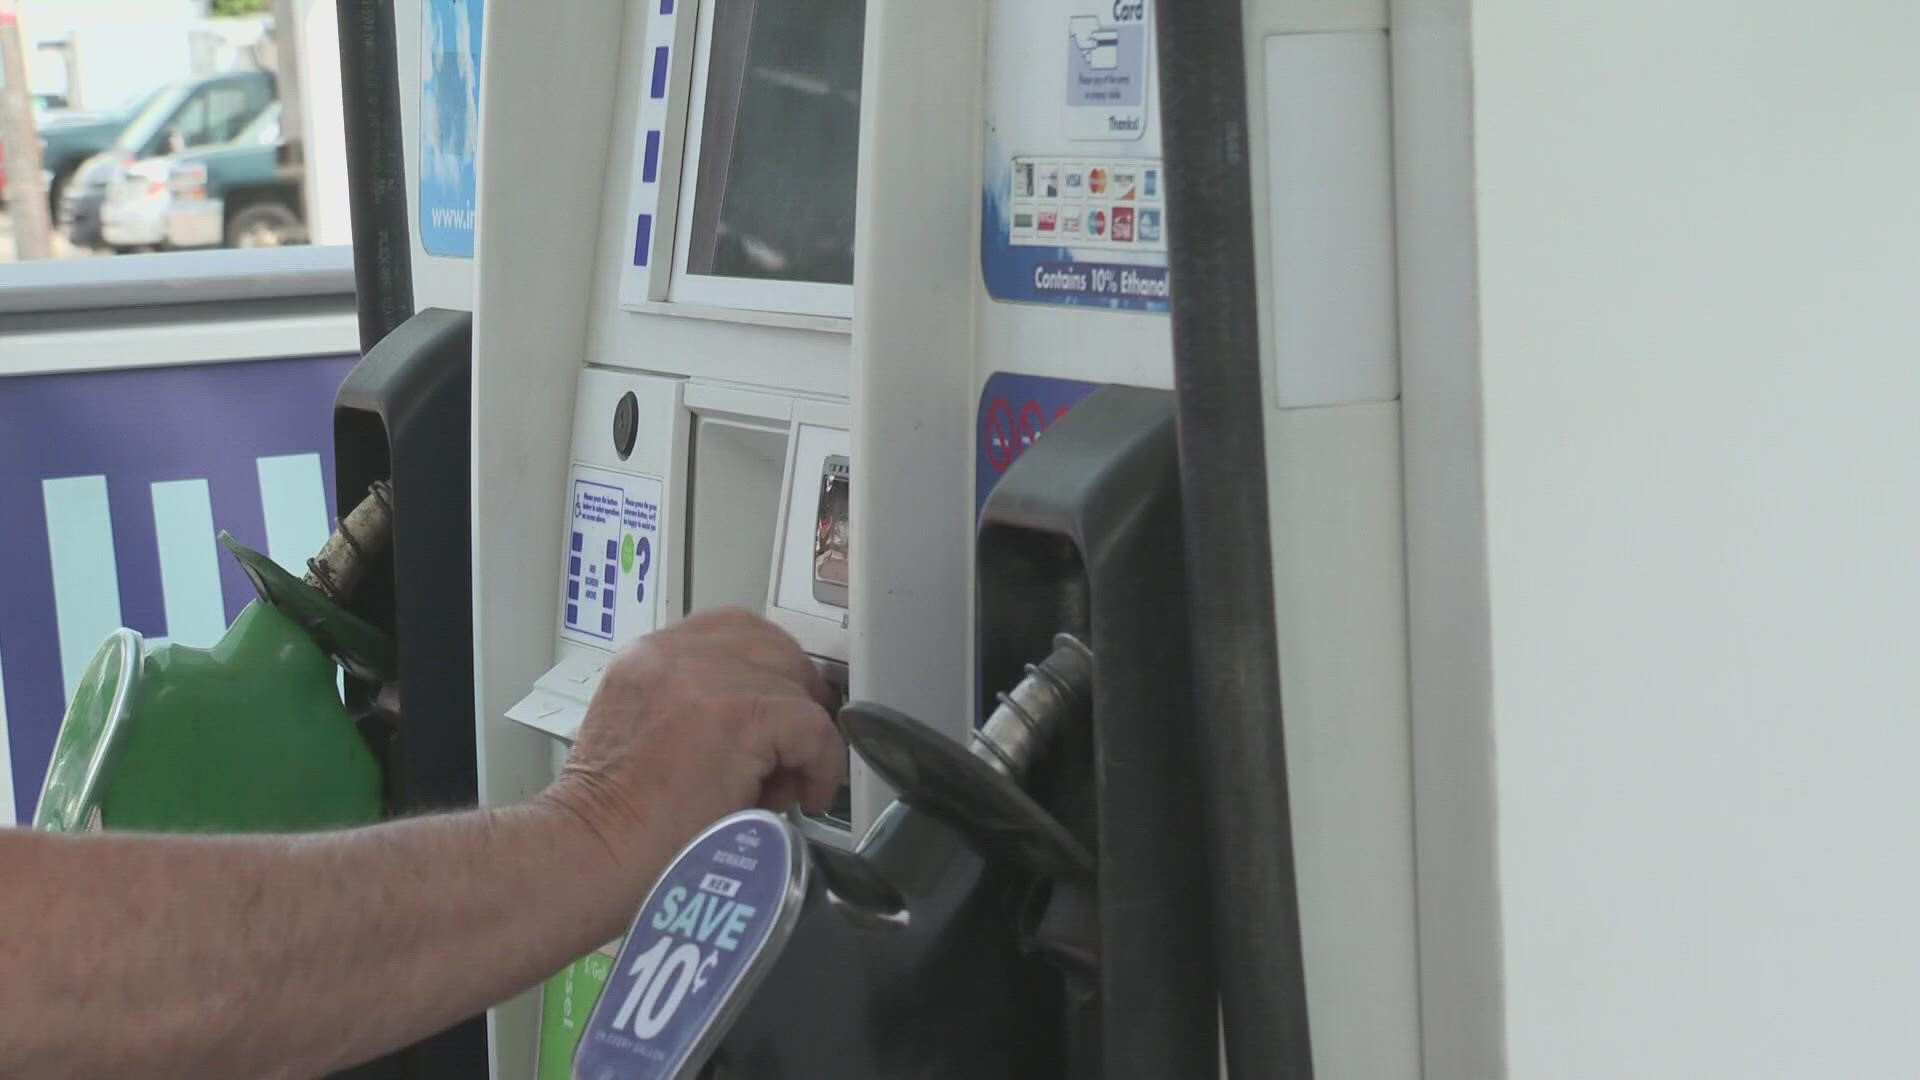 According to AAA, the average price for a gallon of gas in Maine is $4.01 as of Monday.